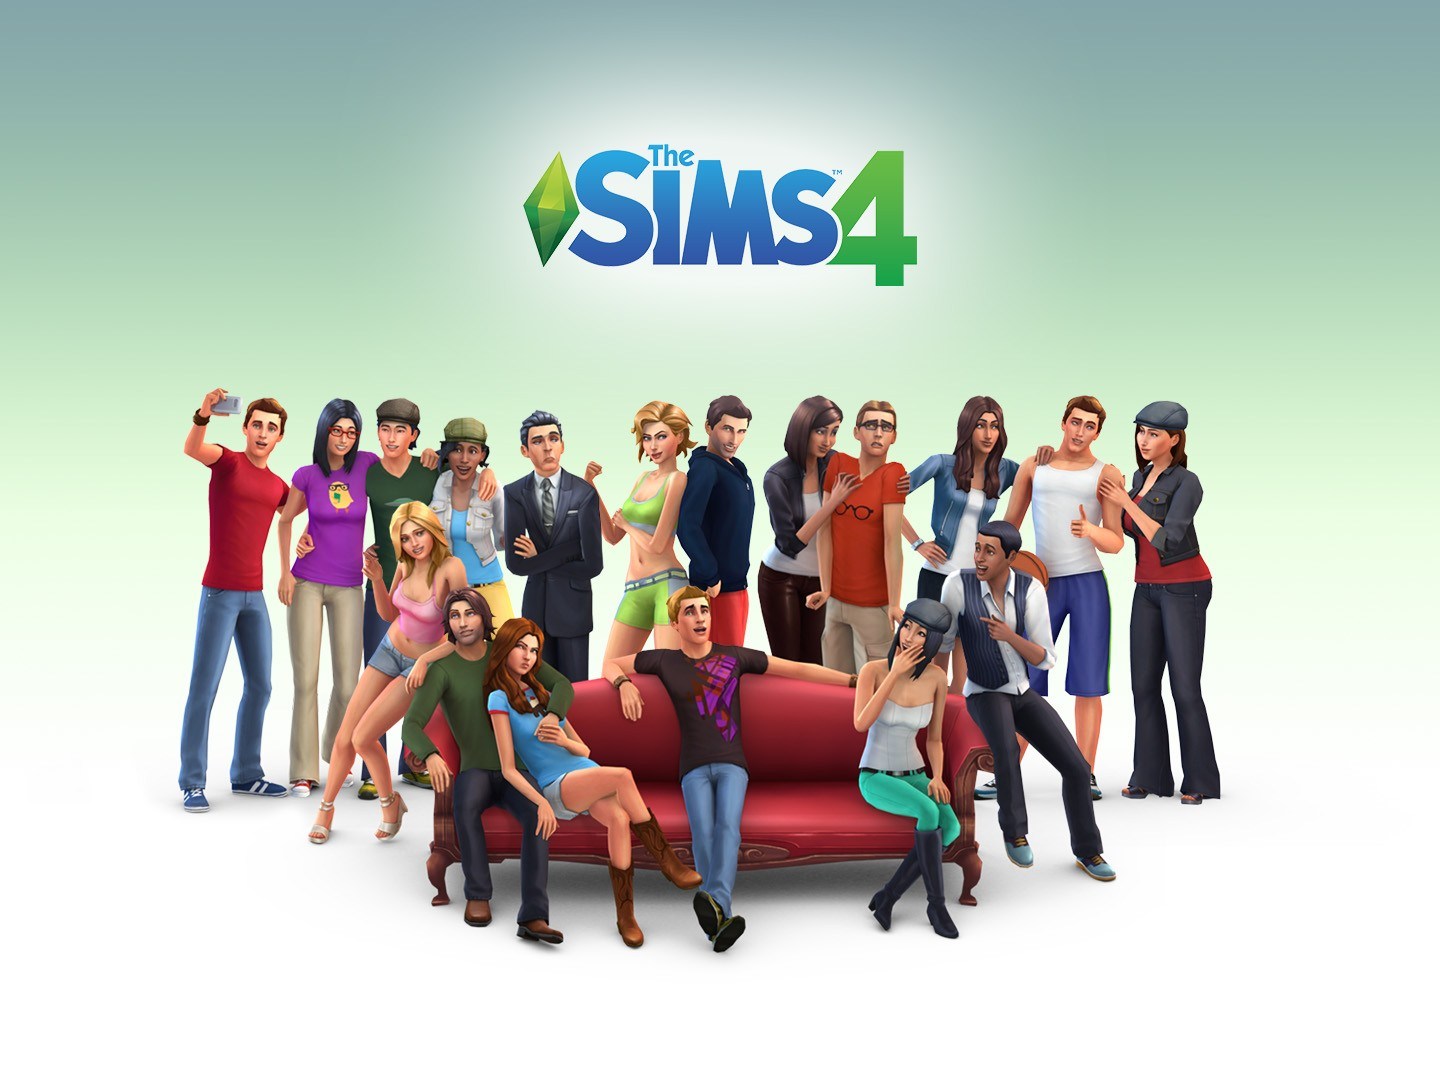 Sims 3 Torrent Cracked